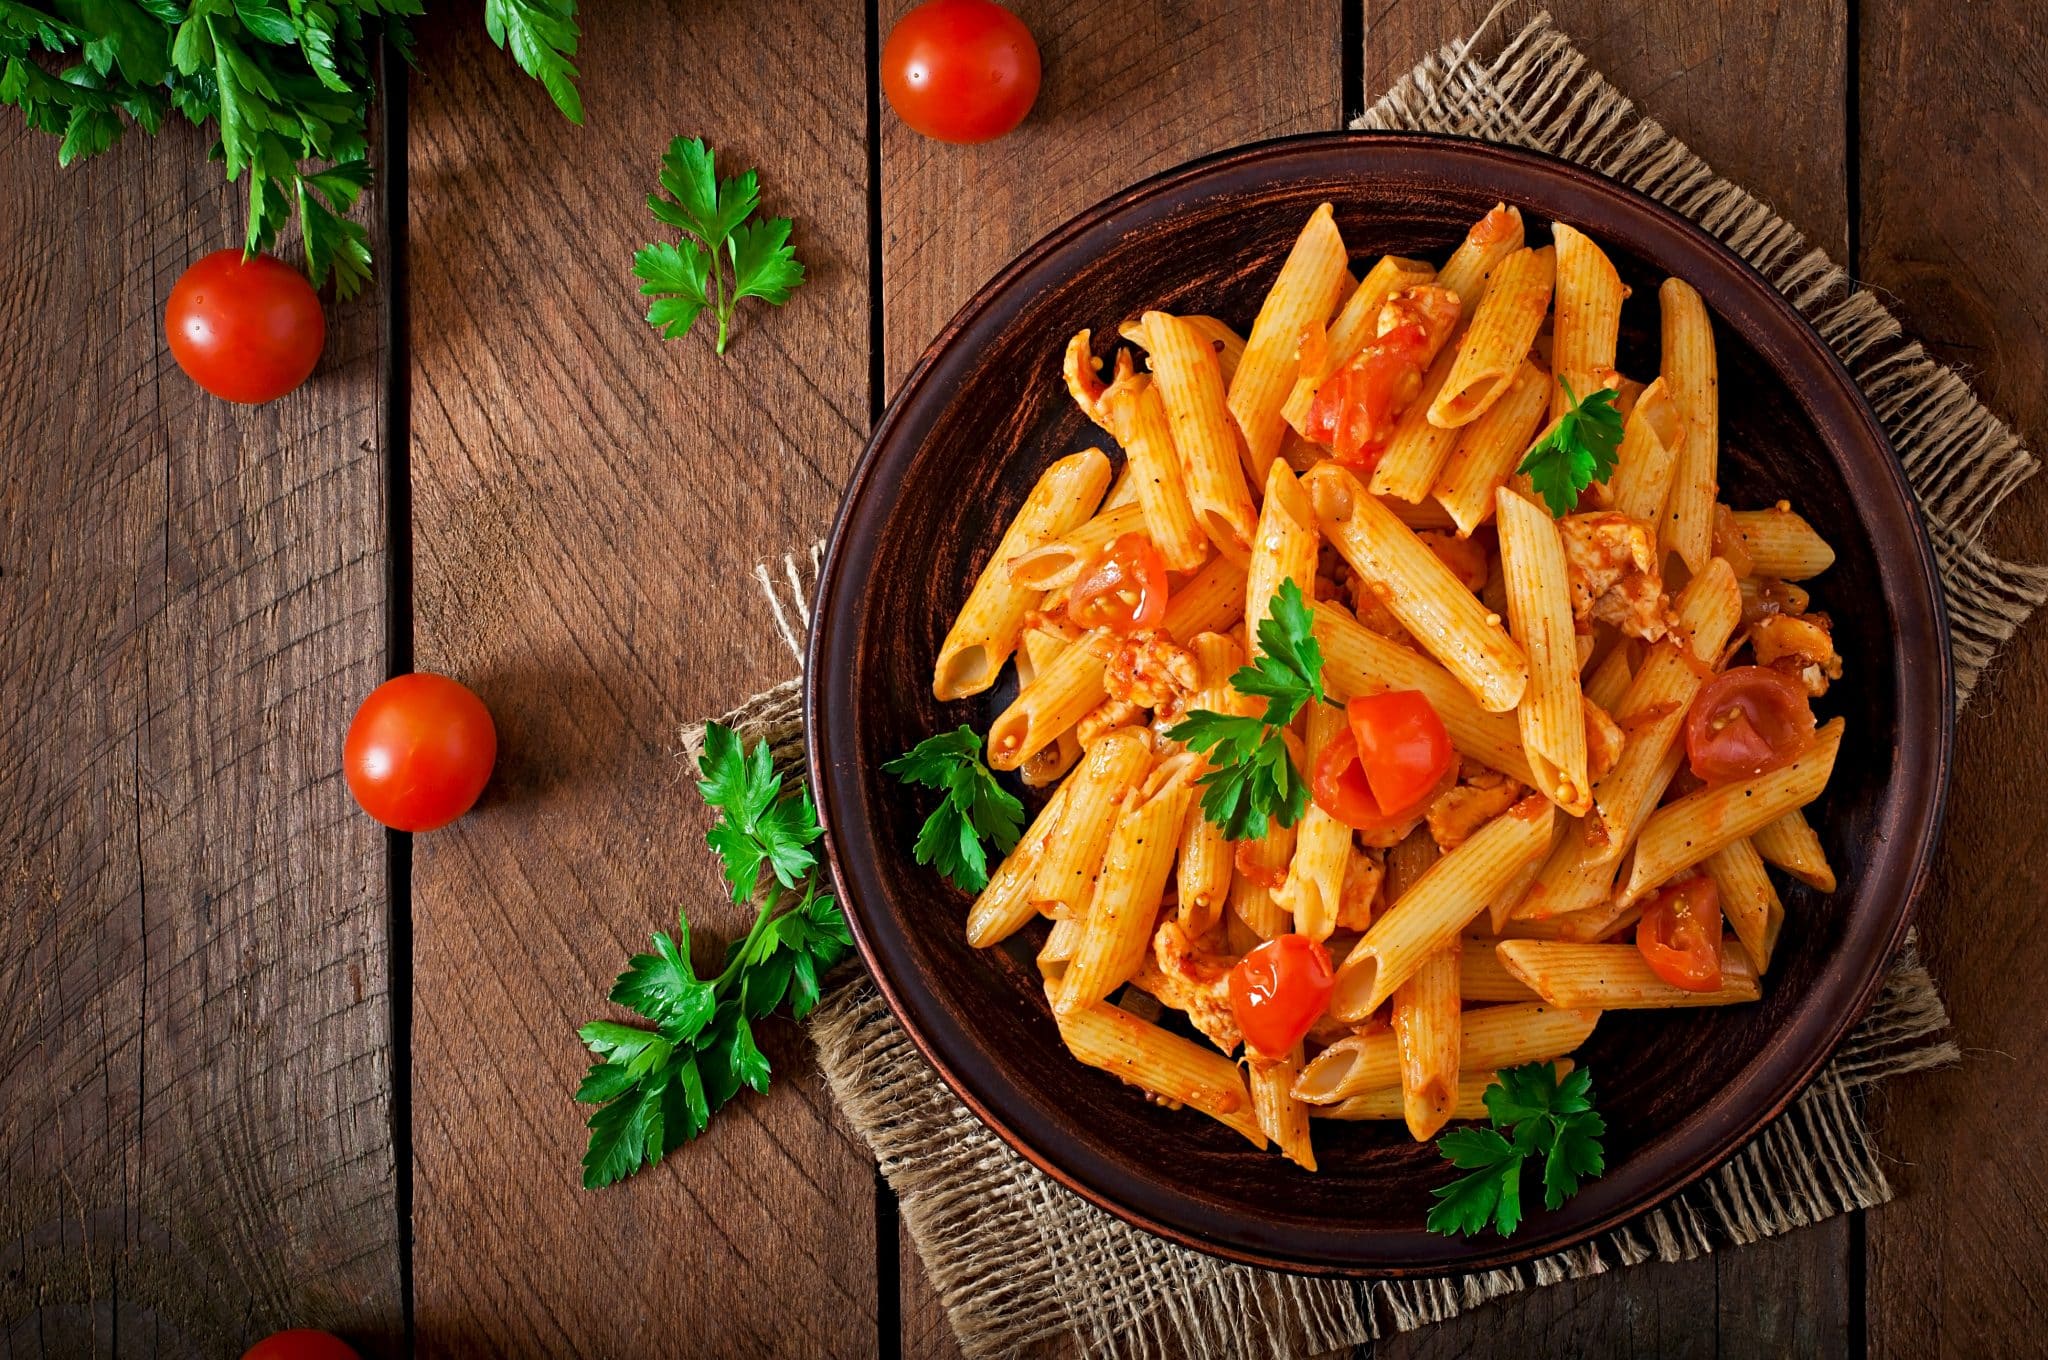 Penne Pasta with Tomato